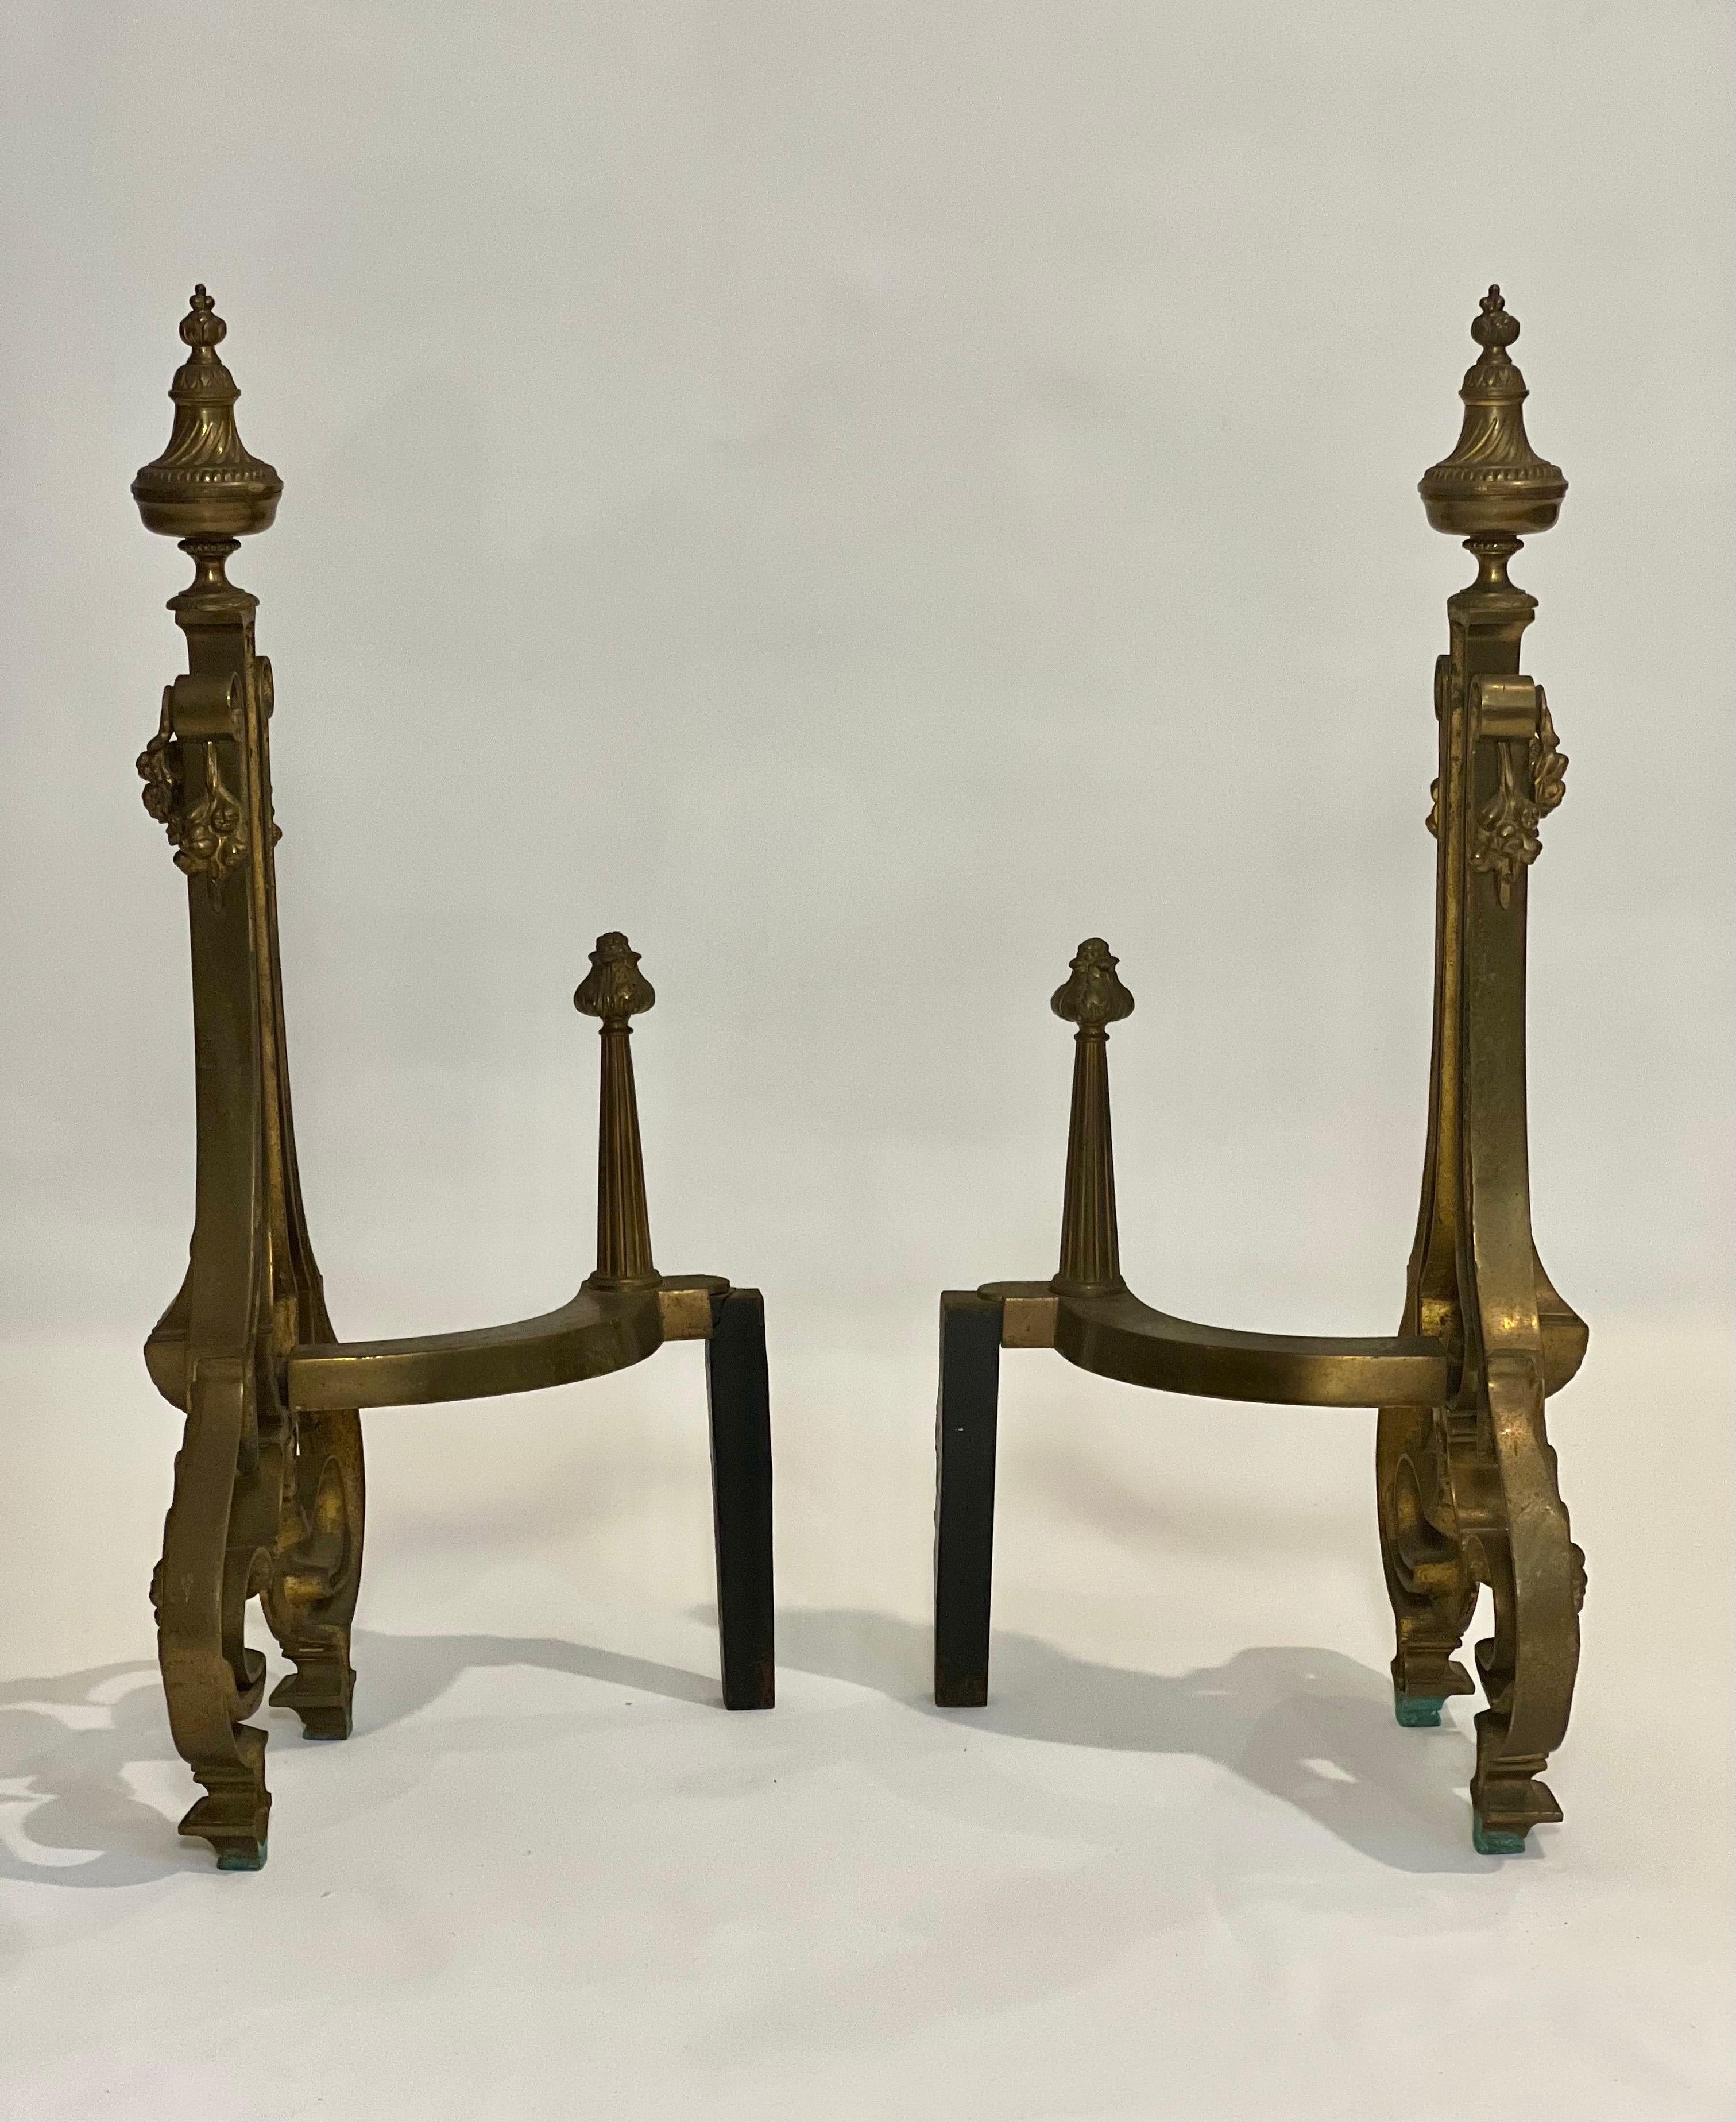 American William H. Jackson Company Neoclassical French Empire Style Gilt Brass Andirons For Sale